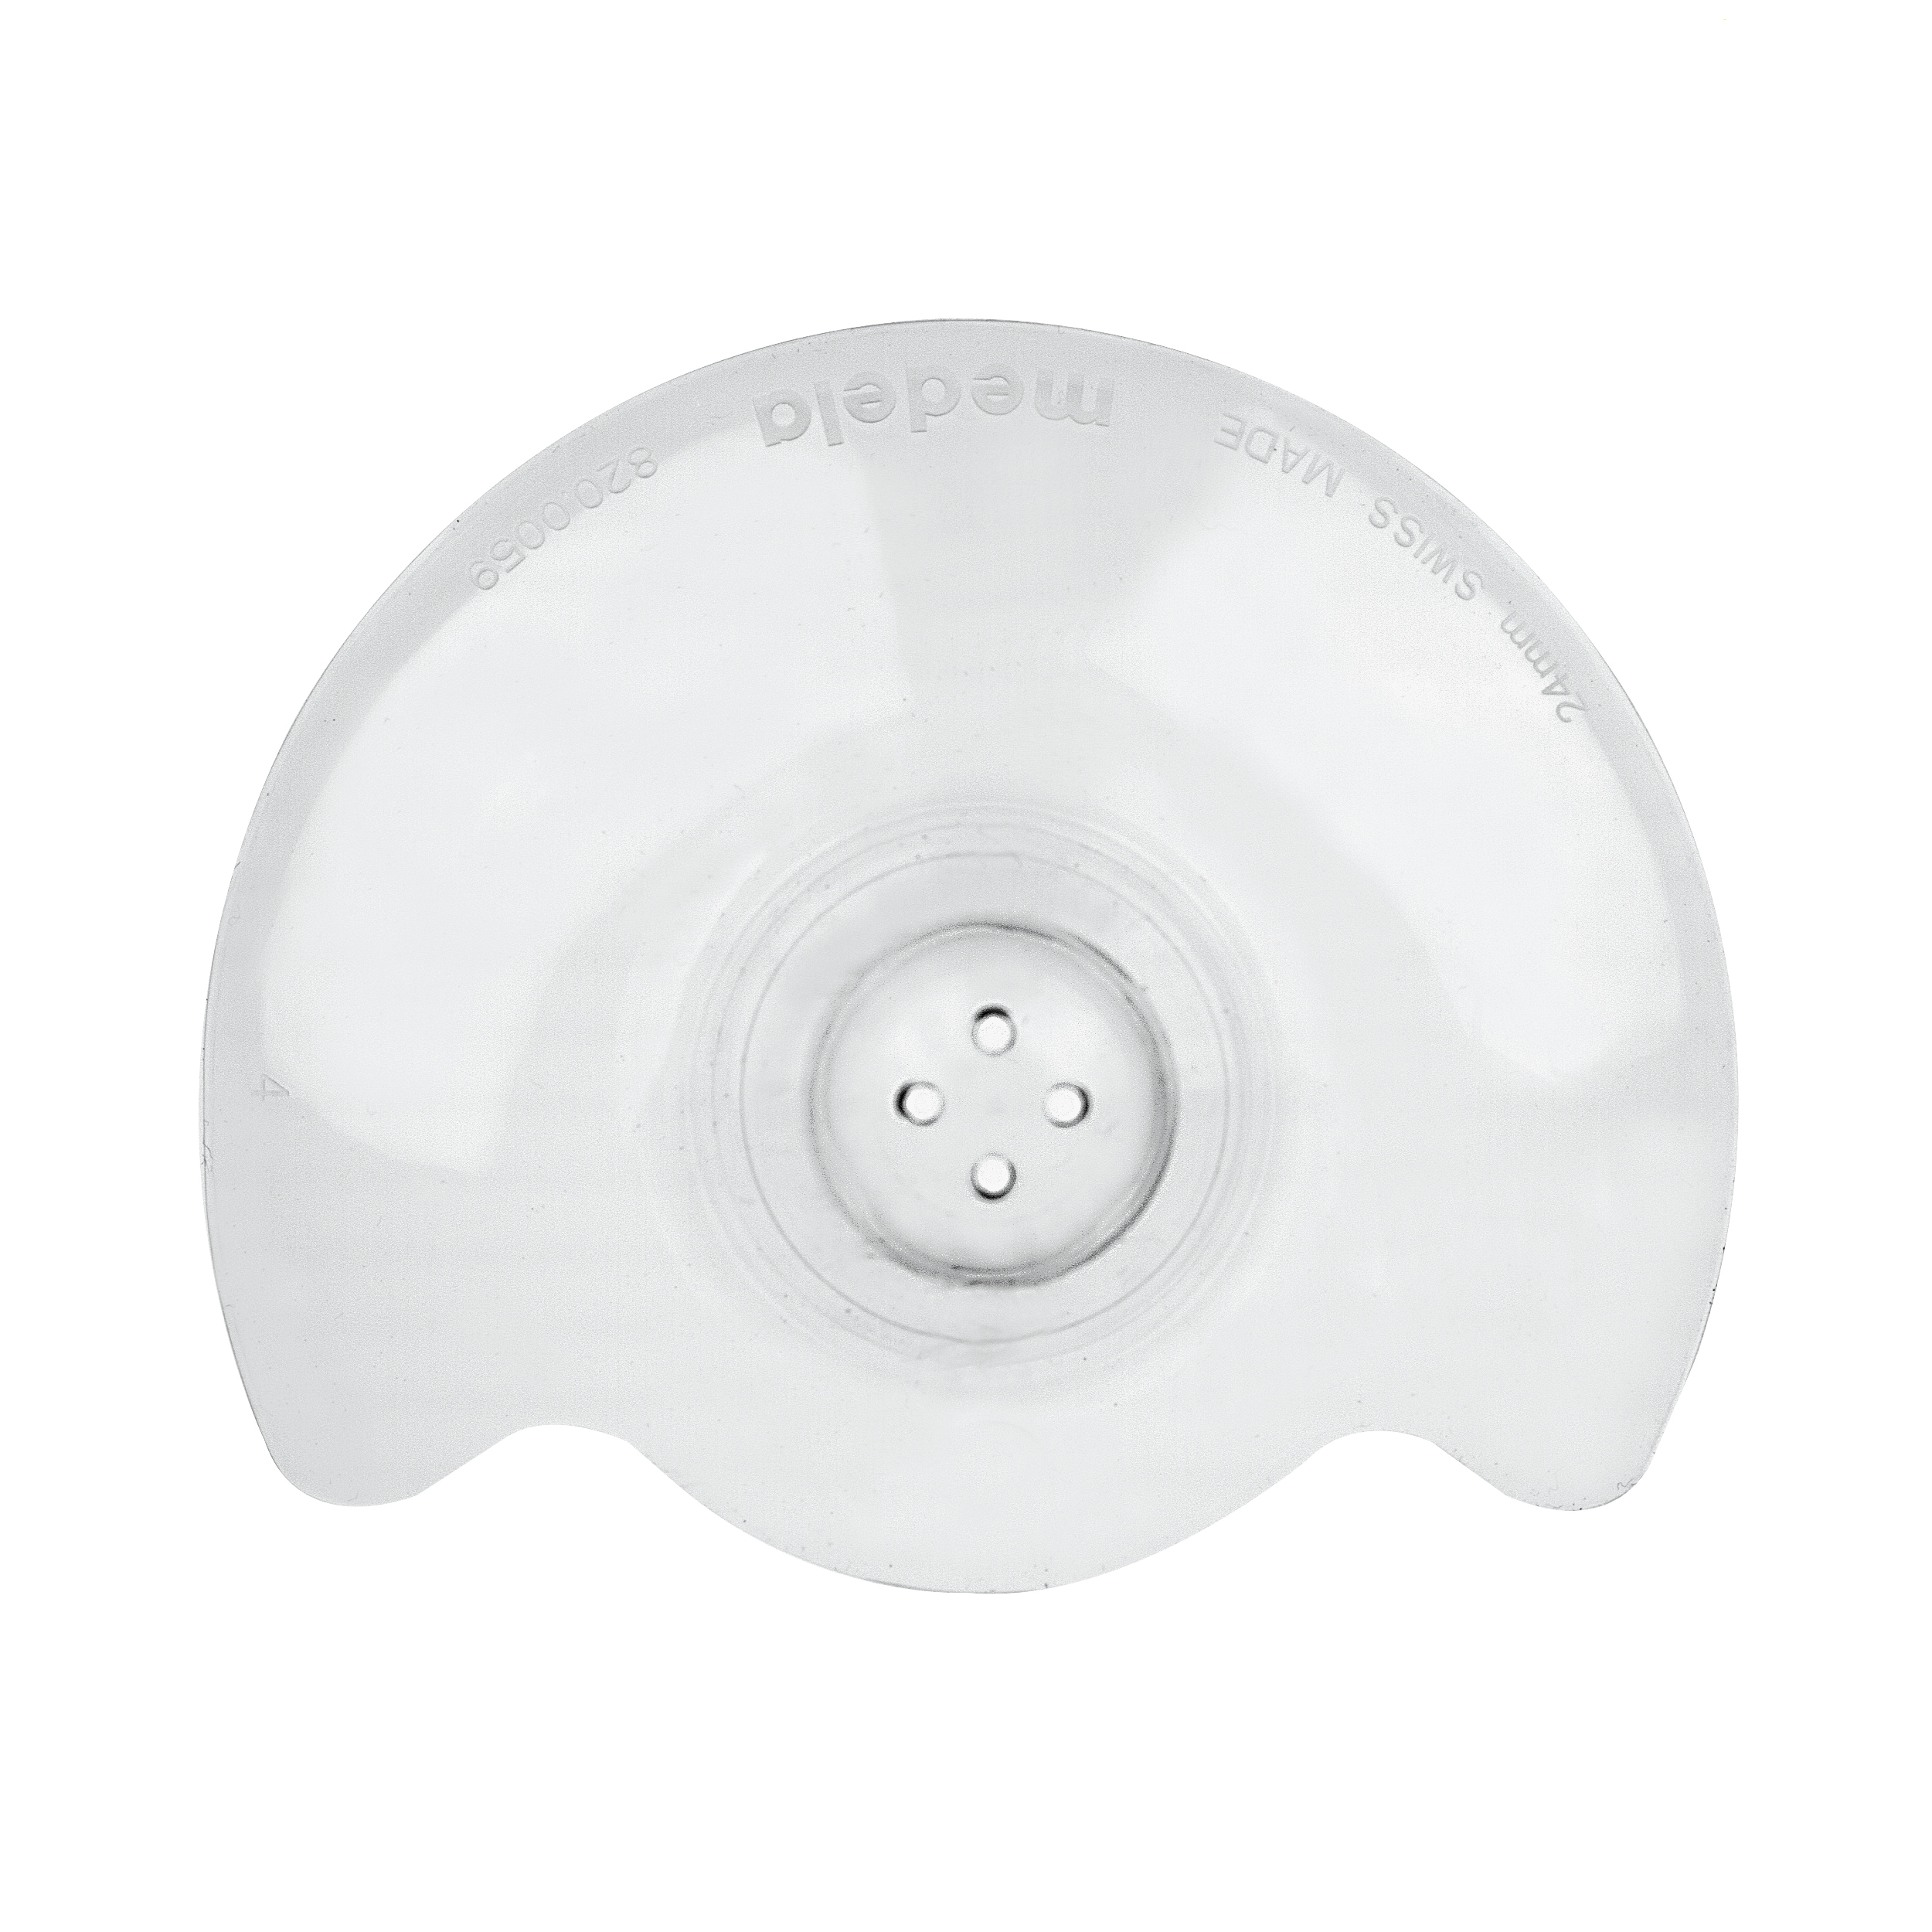 Medela - Contact Nipple Shield (Choose Your Size) - image 2 of 3